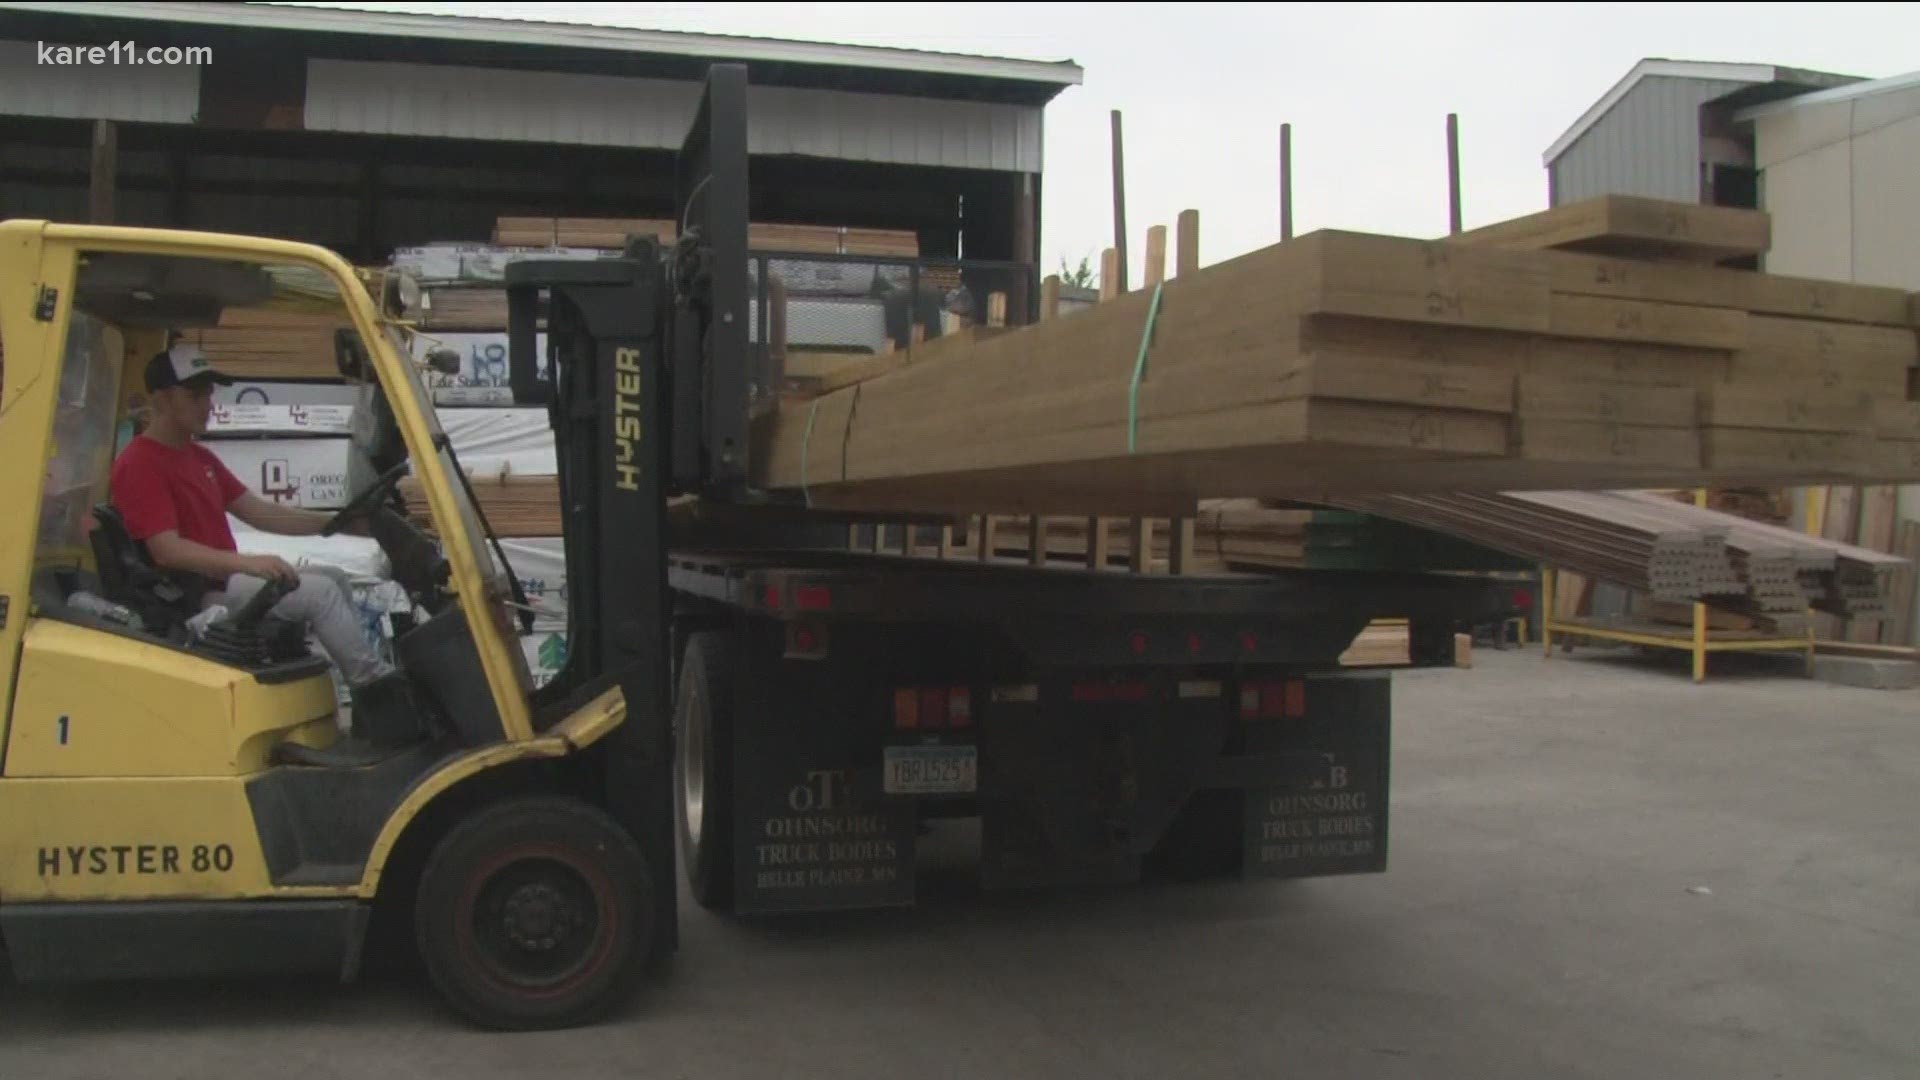 Lumber prices are starting to drop after skyrocketing this past spring